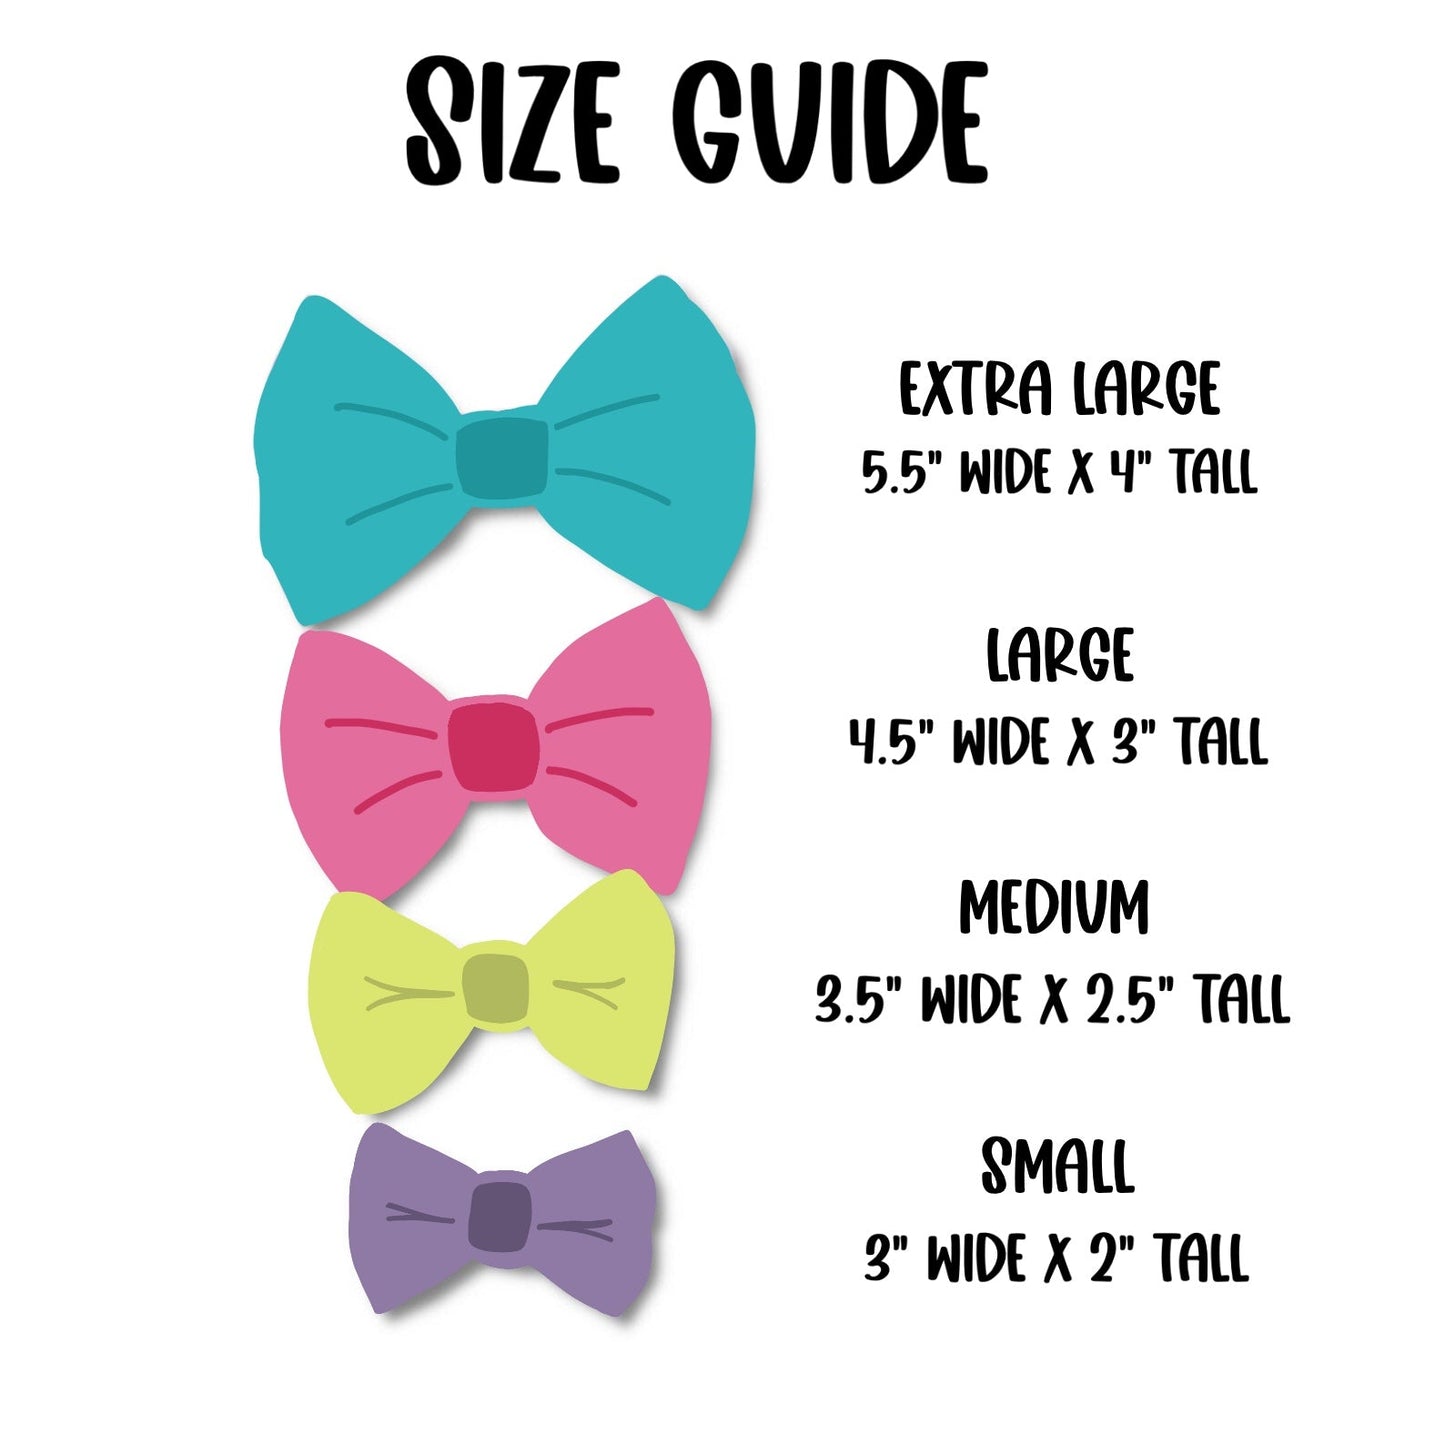 Trendy Spotted Girly Bow - The Paw Pack Goods